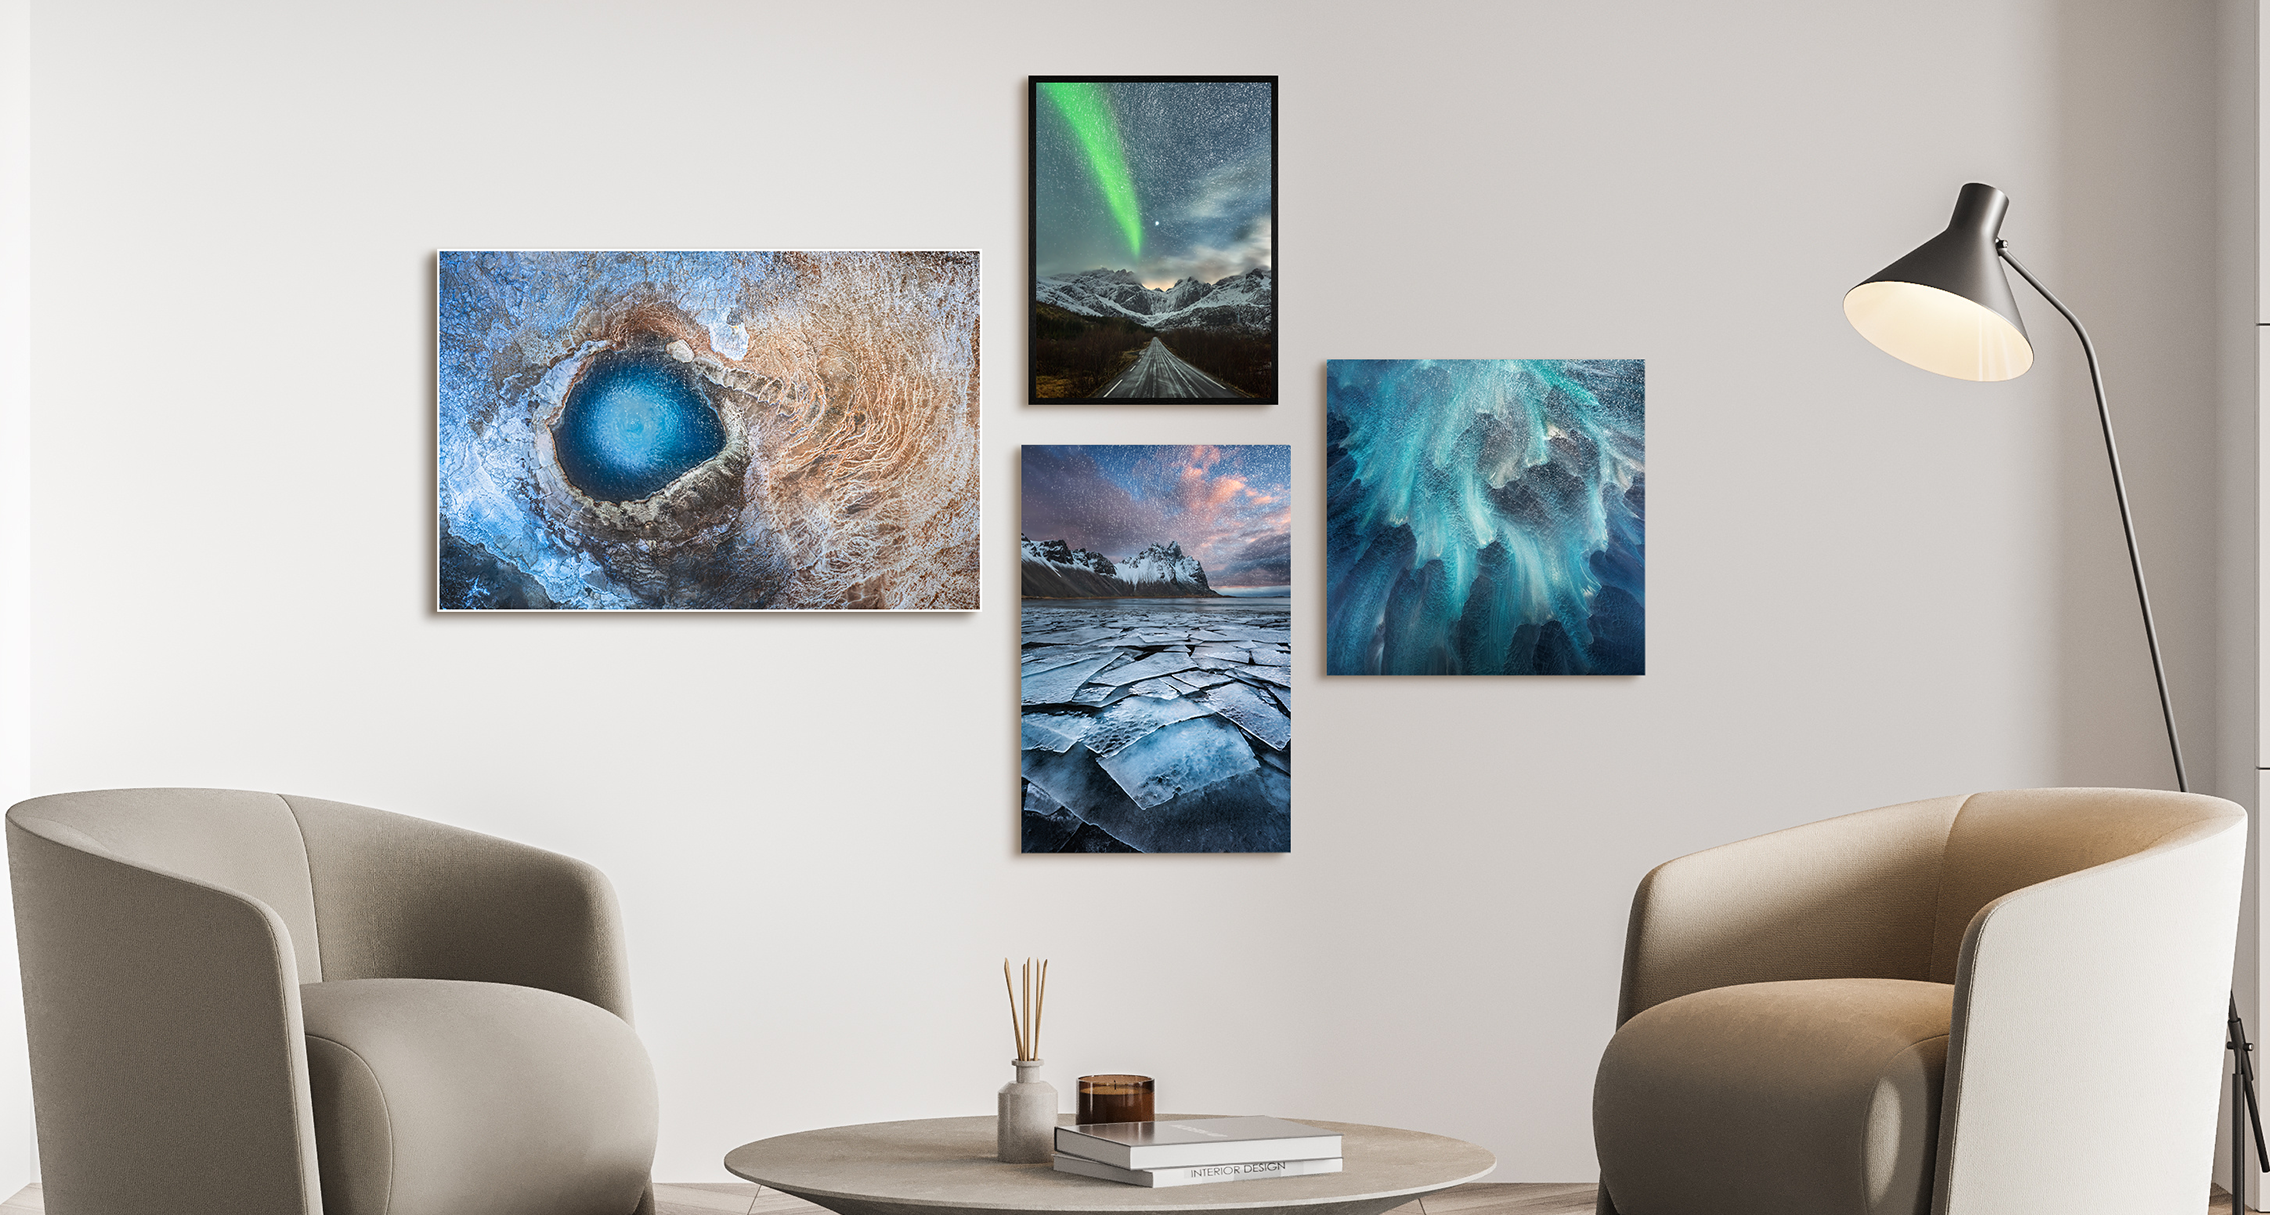 Four pictures of Iceland hanging on a wall next to two arnchairs. All the pictures are printed on Fine Art and some of them are framed.